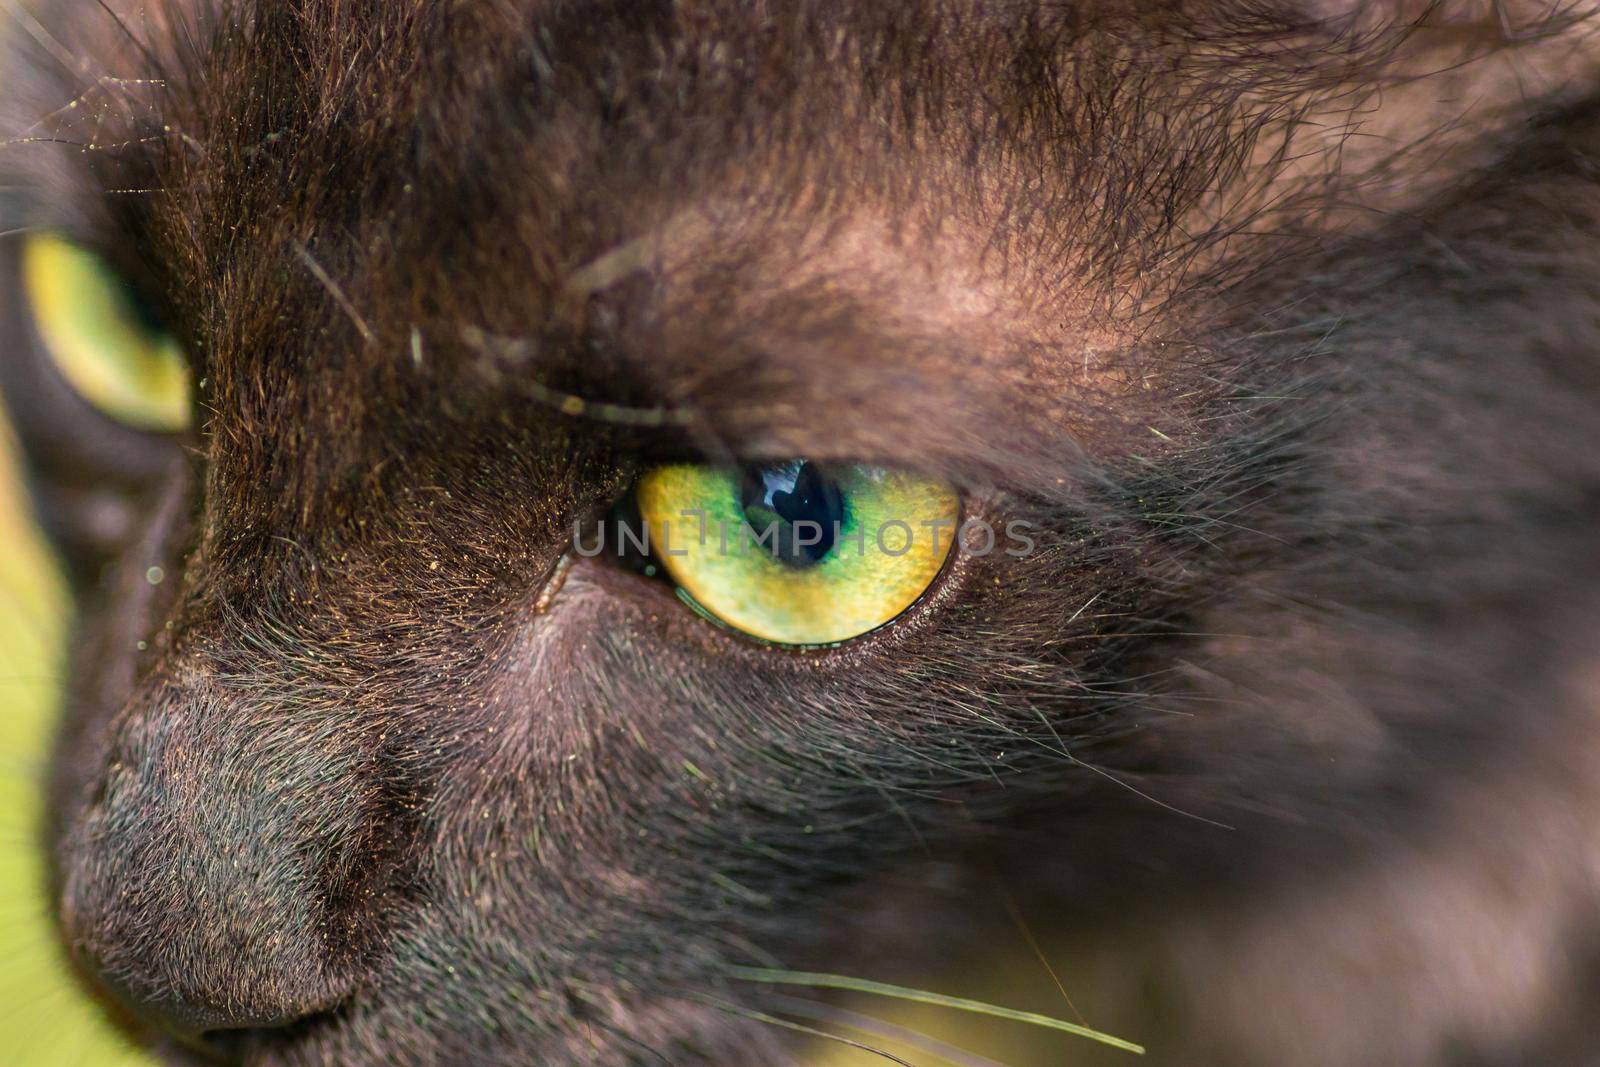 a sharp focus locked on to prey, close up macro photograph of young baby cat's green eyes, from above.